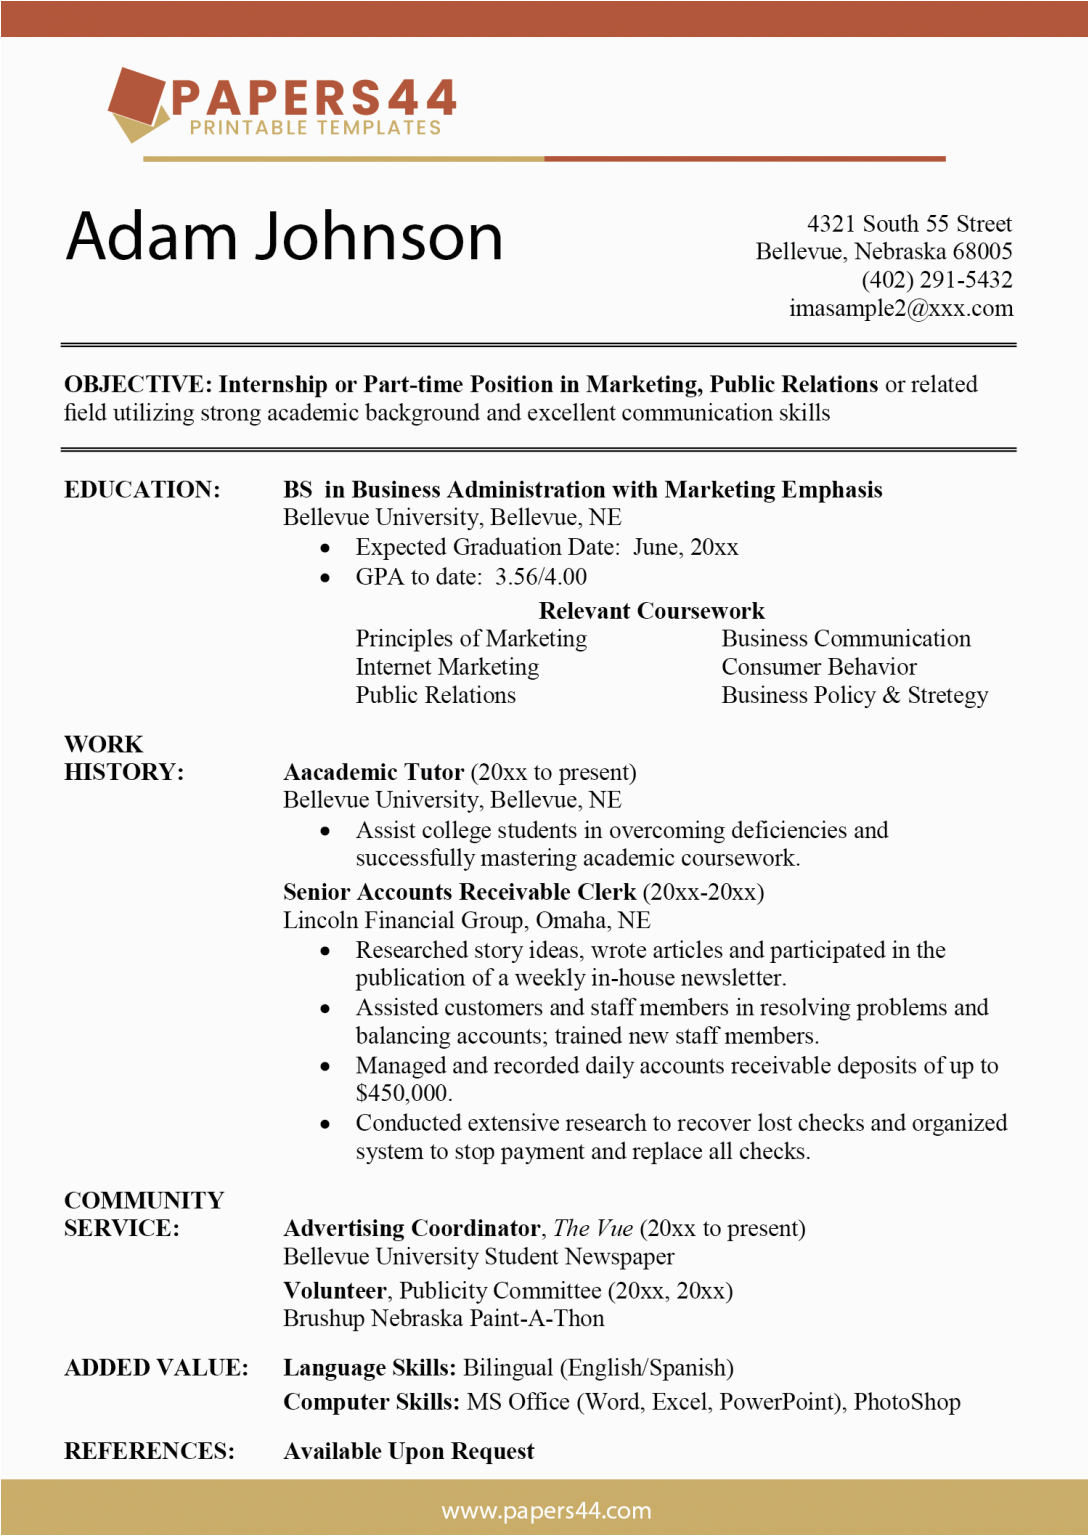 Reverse Chronological Resume Template Free Download Reverse Chronological Resume format Download